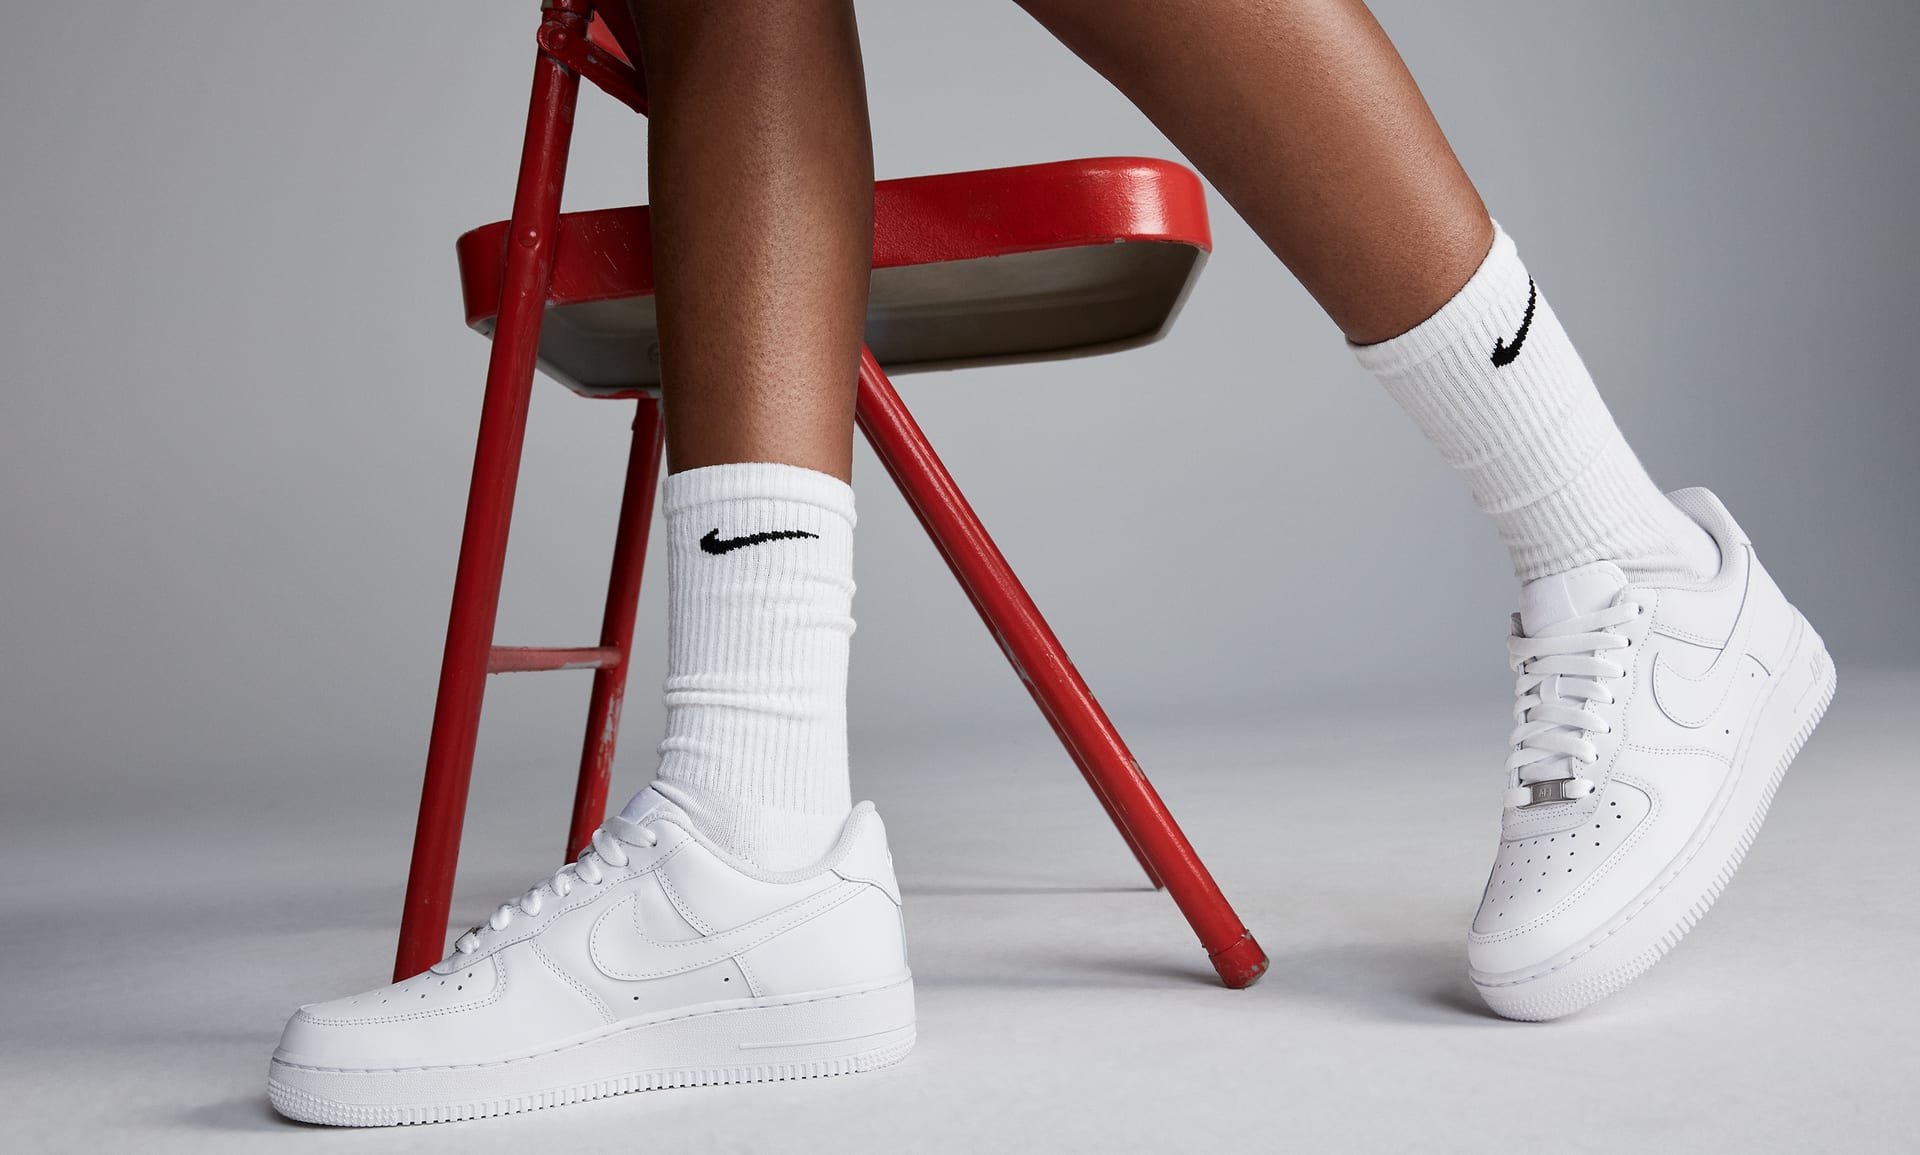 socks with air force 1